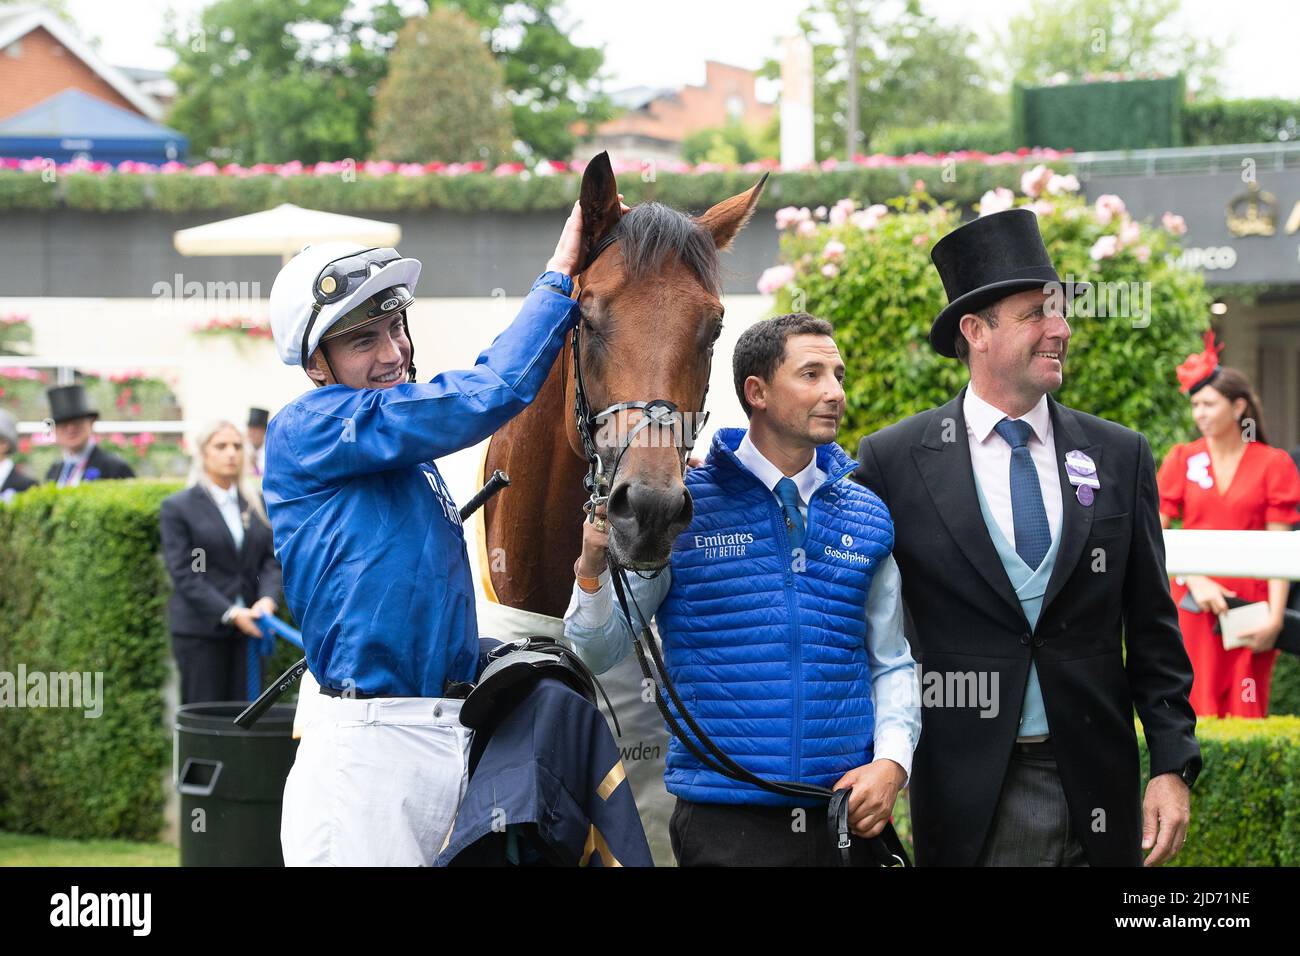 Ascot, Berkshire, UK. 18th June, 2022. Horse Naval Crown ridden by jockey James Doyle wearing Godolphin blue silks won the Platinum Jubilee Stakes million pound race today at Royal Ascot. This was another win for Godolphin and trainer Charlie Appleby. Credit: Maureen McLean/Alamy Live News Stock Photo